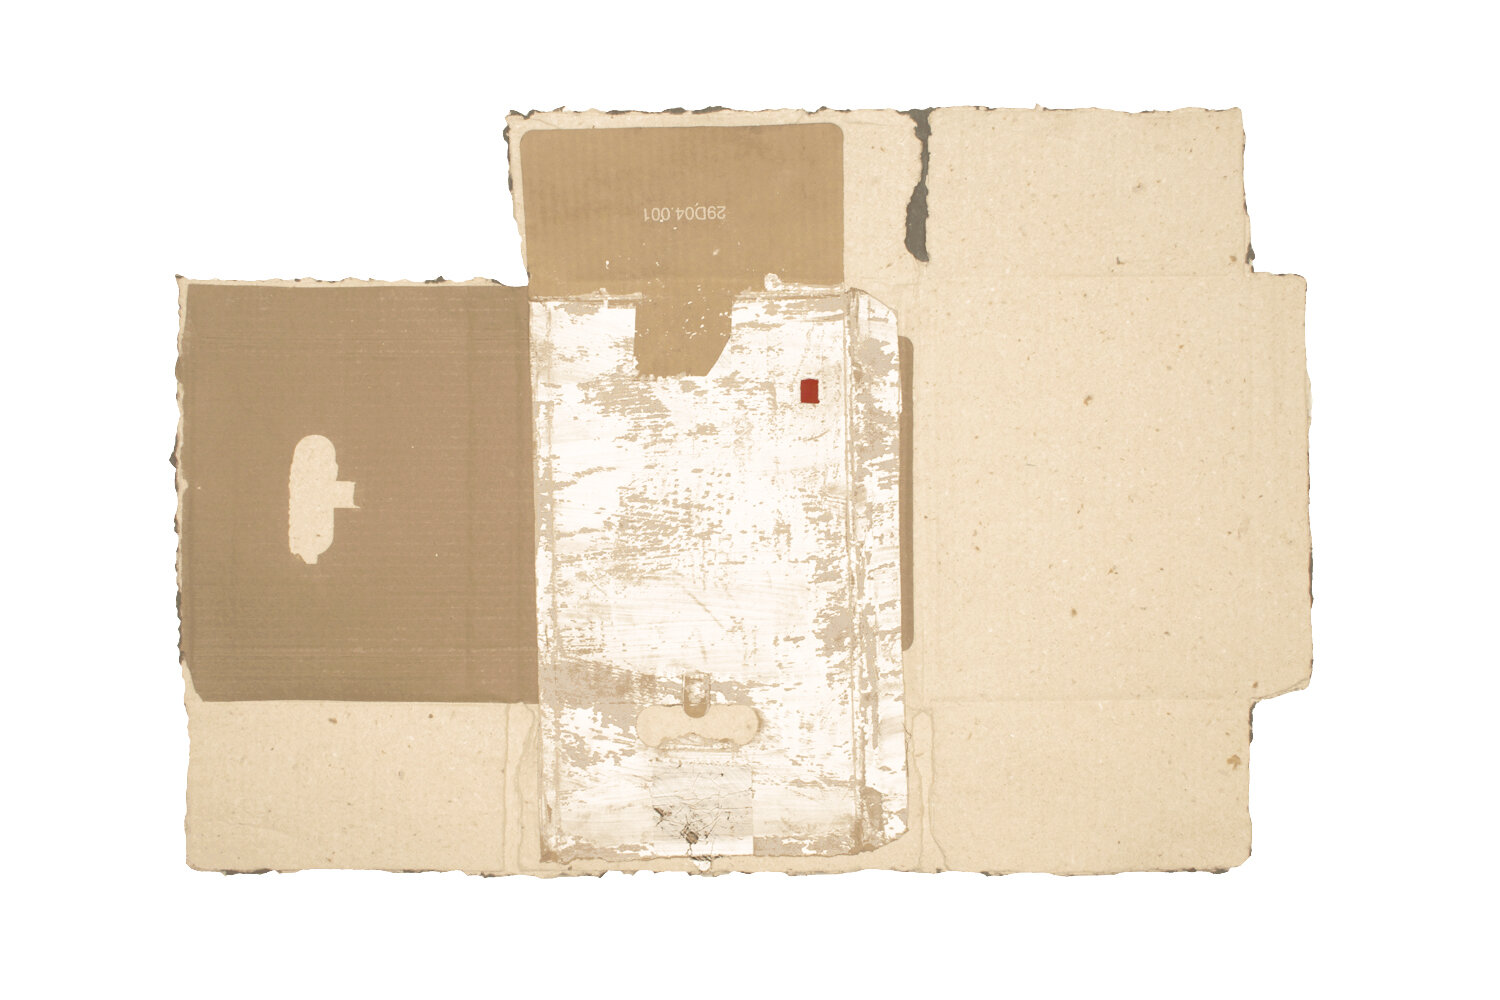   Lisa Sigal   Curbside (Grey Flag) , 2016 Painted cardboard collage, cast pigmented cardboard and cotton pulp 32 1/2 x 21 1/2 inches 